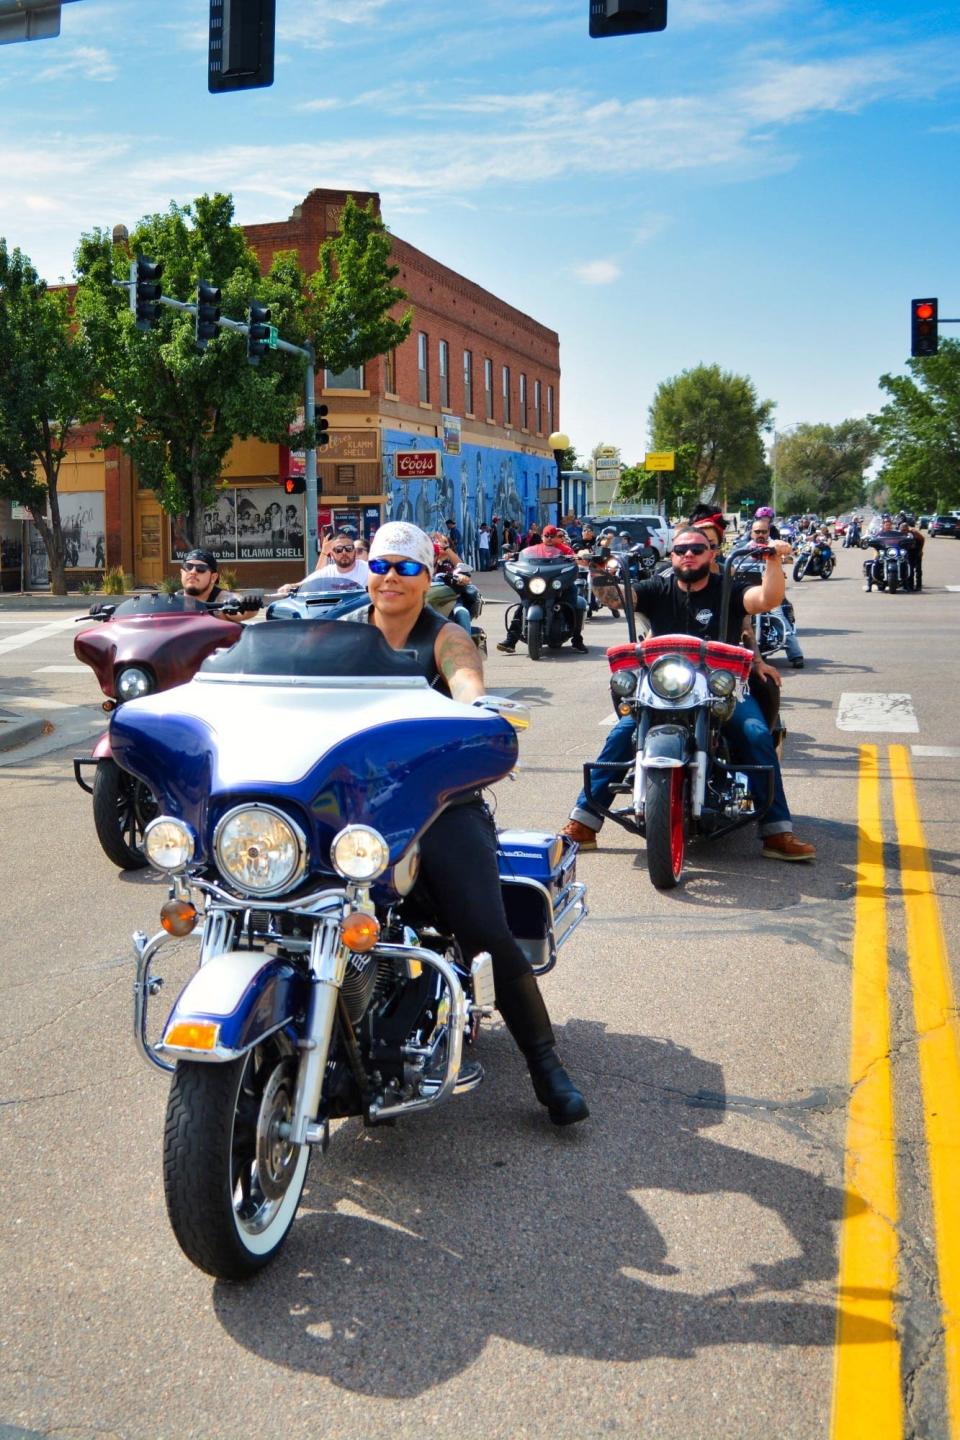 Motorcyclists take part in the Vialpando Vicla in 2021 to raise money for a scholarship fund set up in memory of Isaiah Vialpando, who was shot dead in Pueblo in 2015.